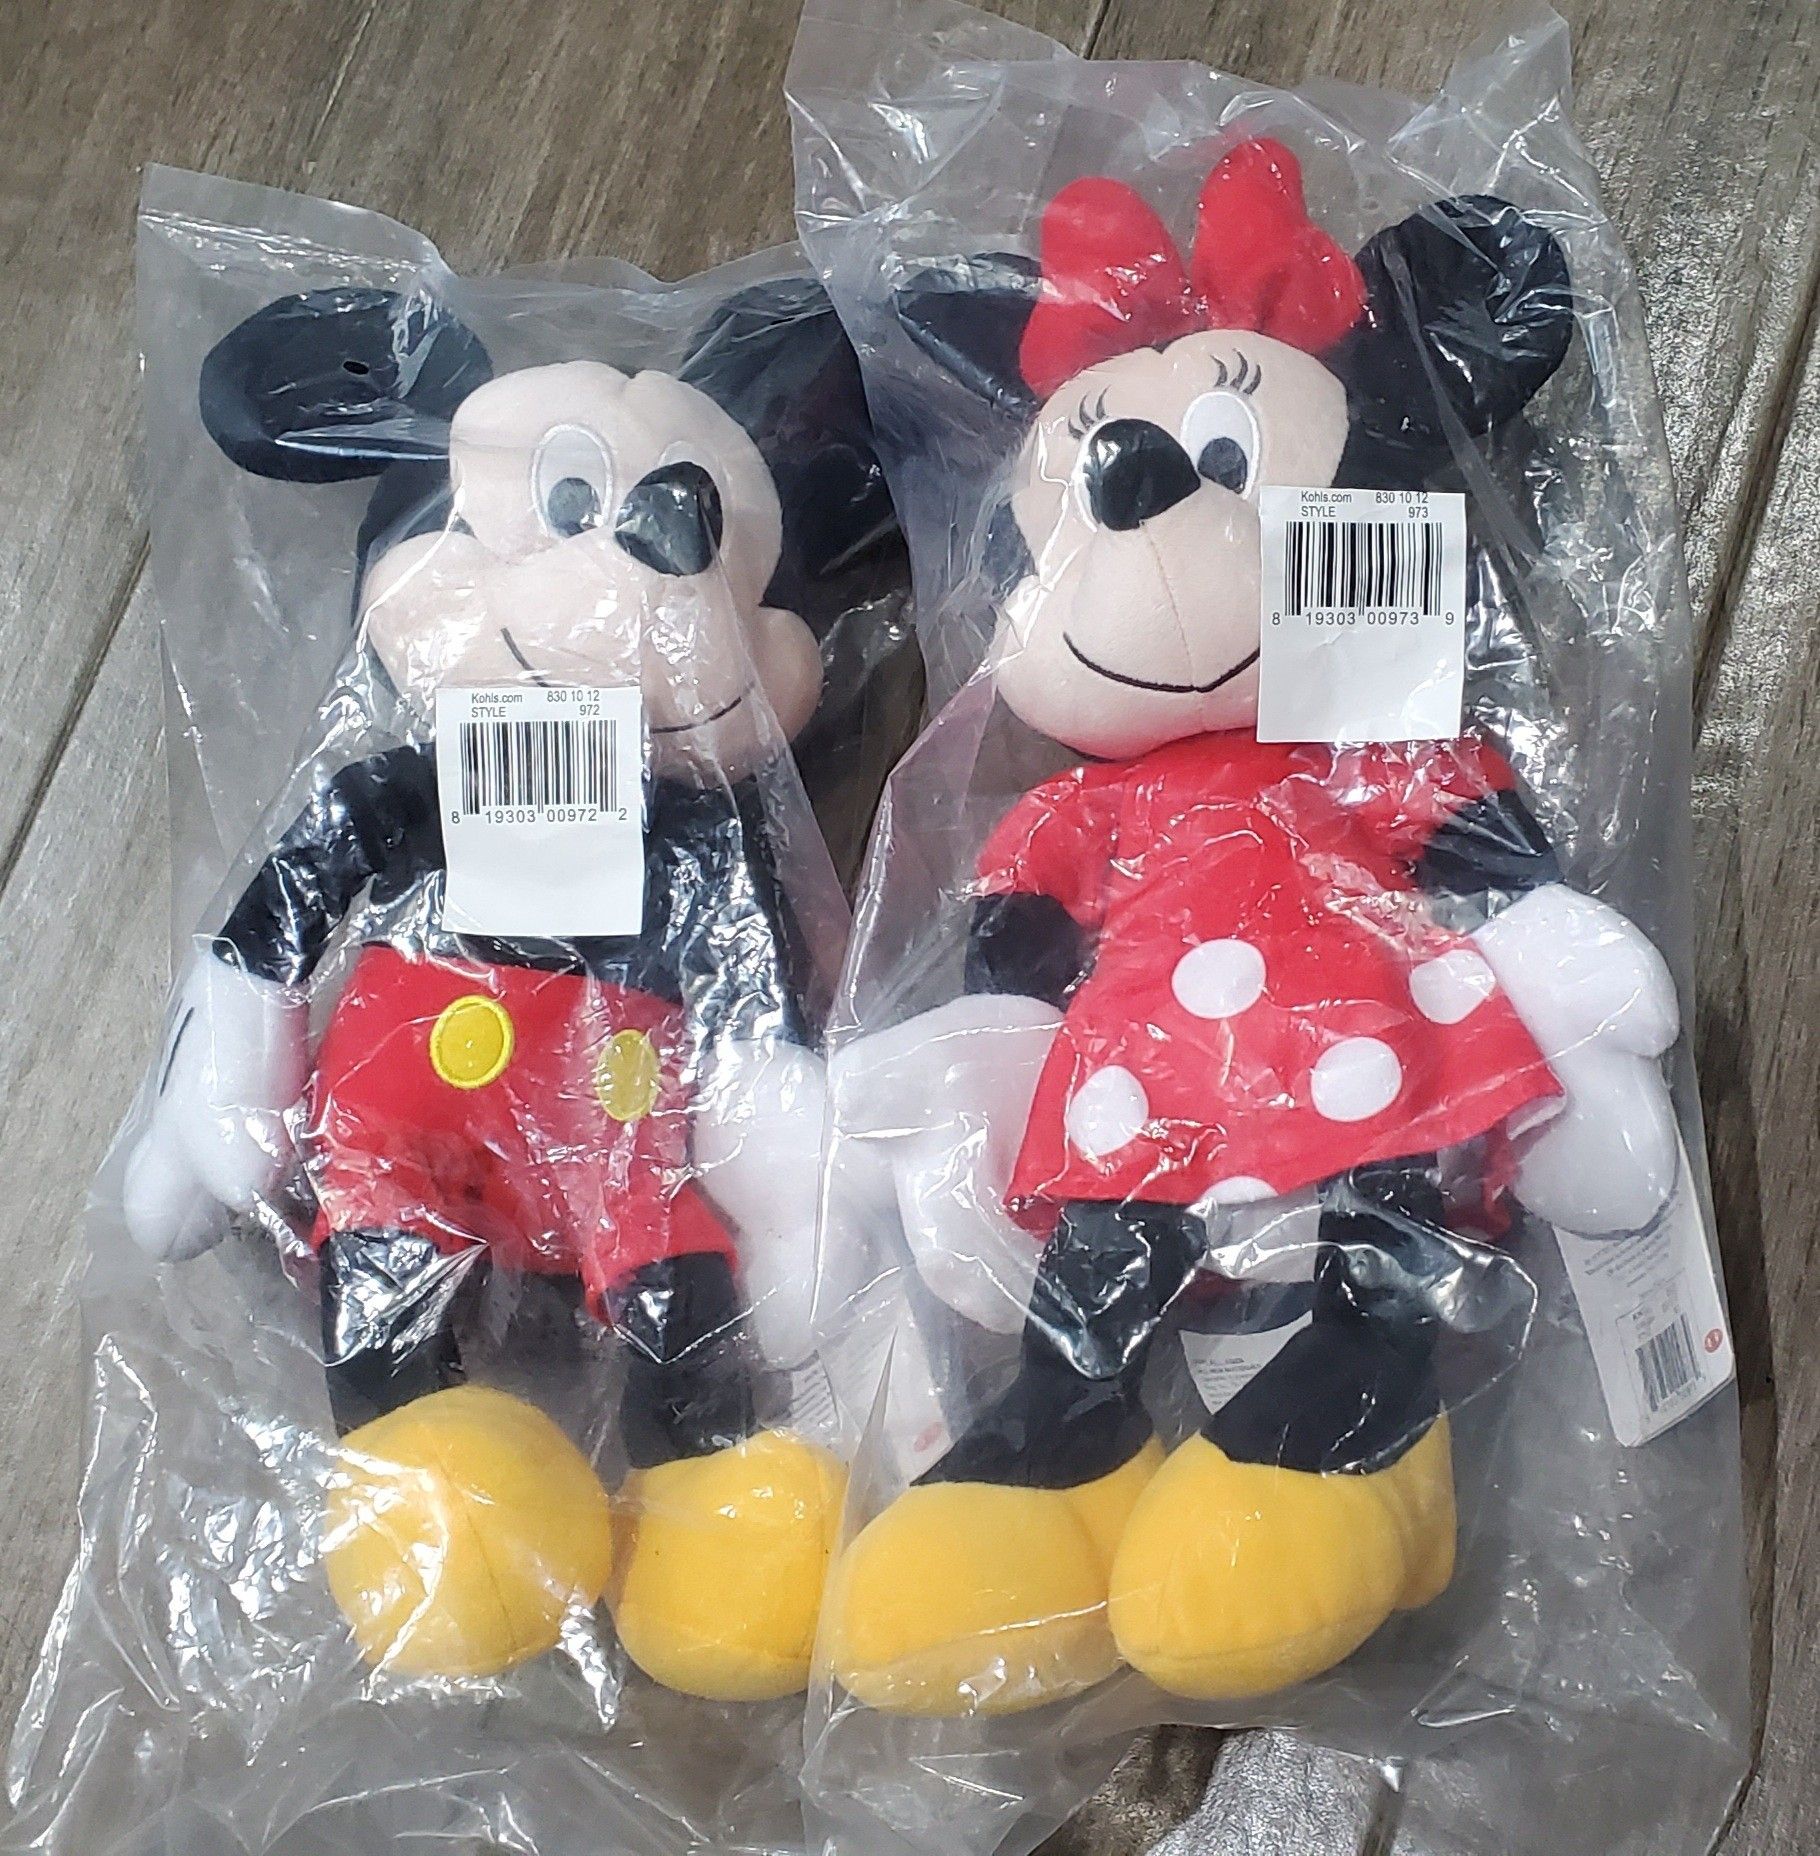 Mickey Mouse and Minnie Mouse Kohl's Cares Stuffed Plush 14" Figures